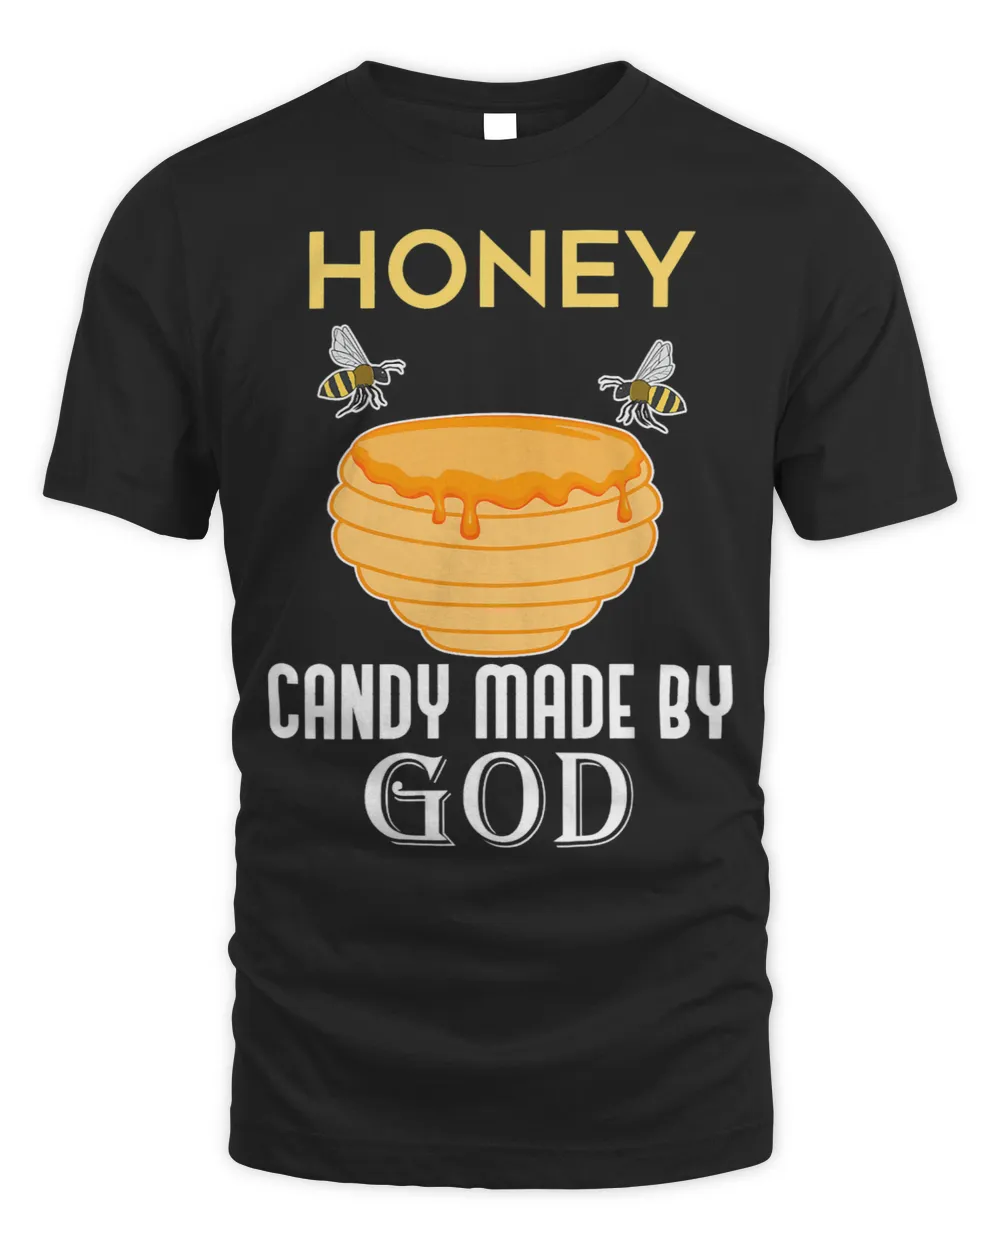 Ironic Saying Honey is Natural Candy Nature Bees